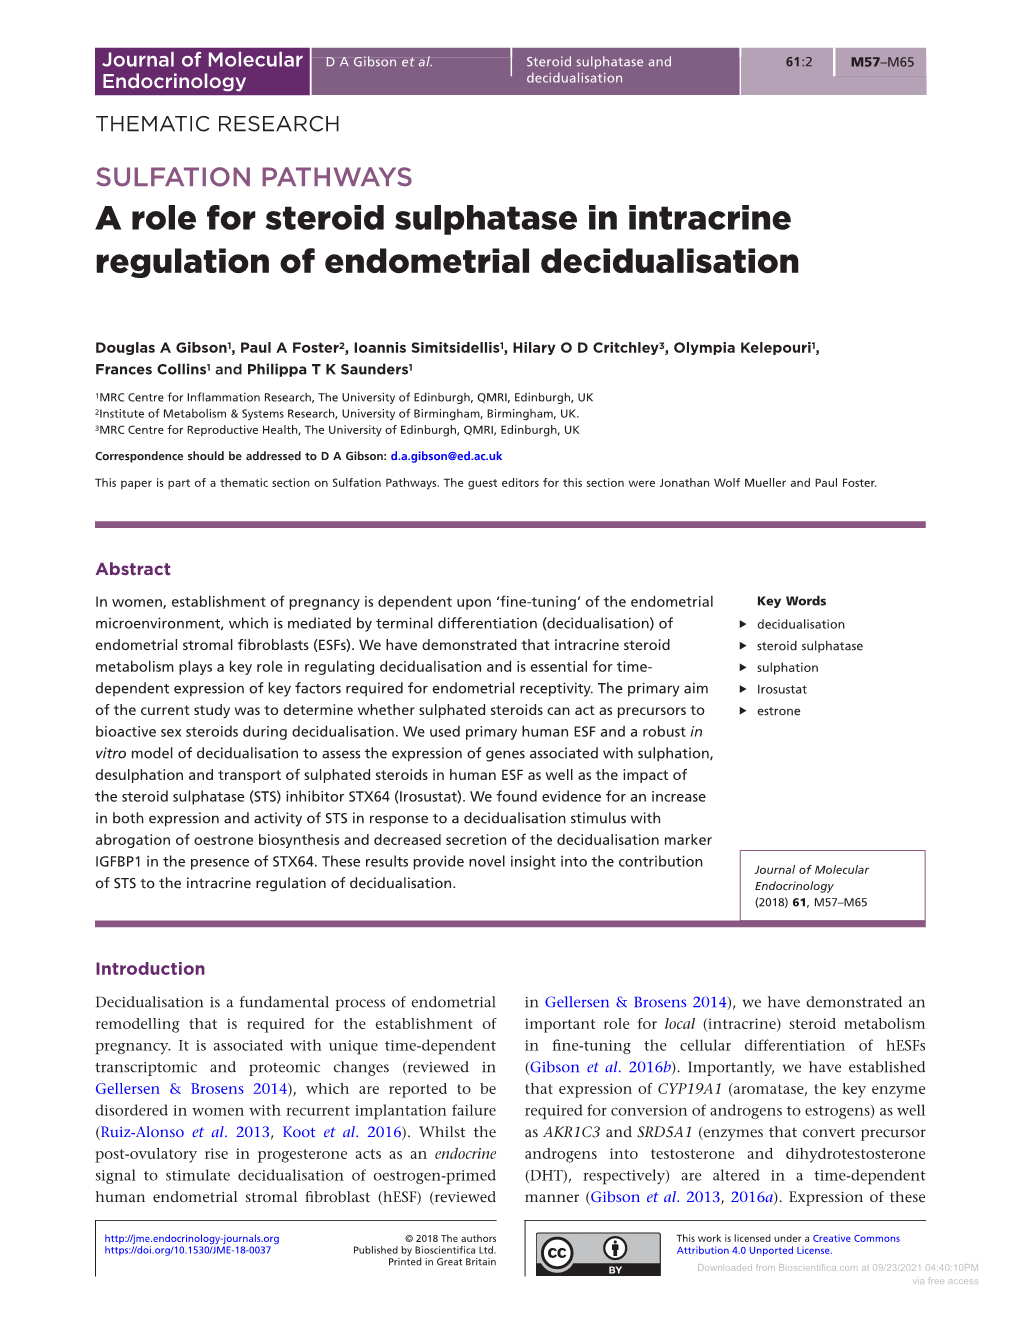 A Role for Steroid Sulphatase in Intracrine Regulation of Endometrial Decidualisation